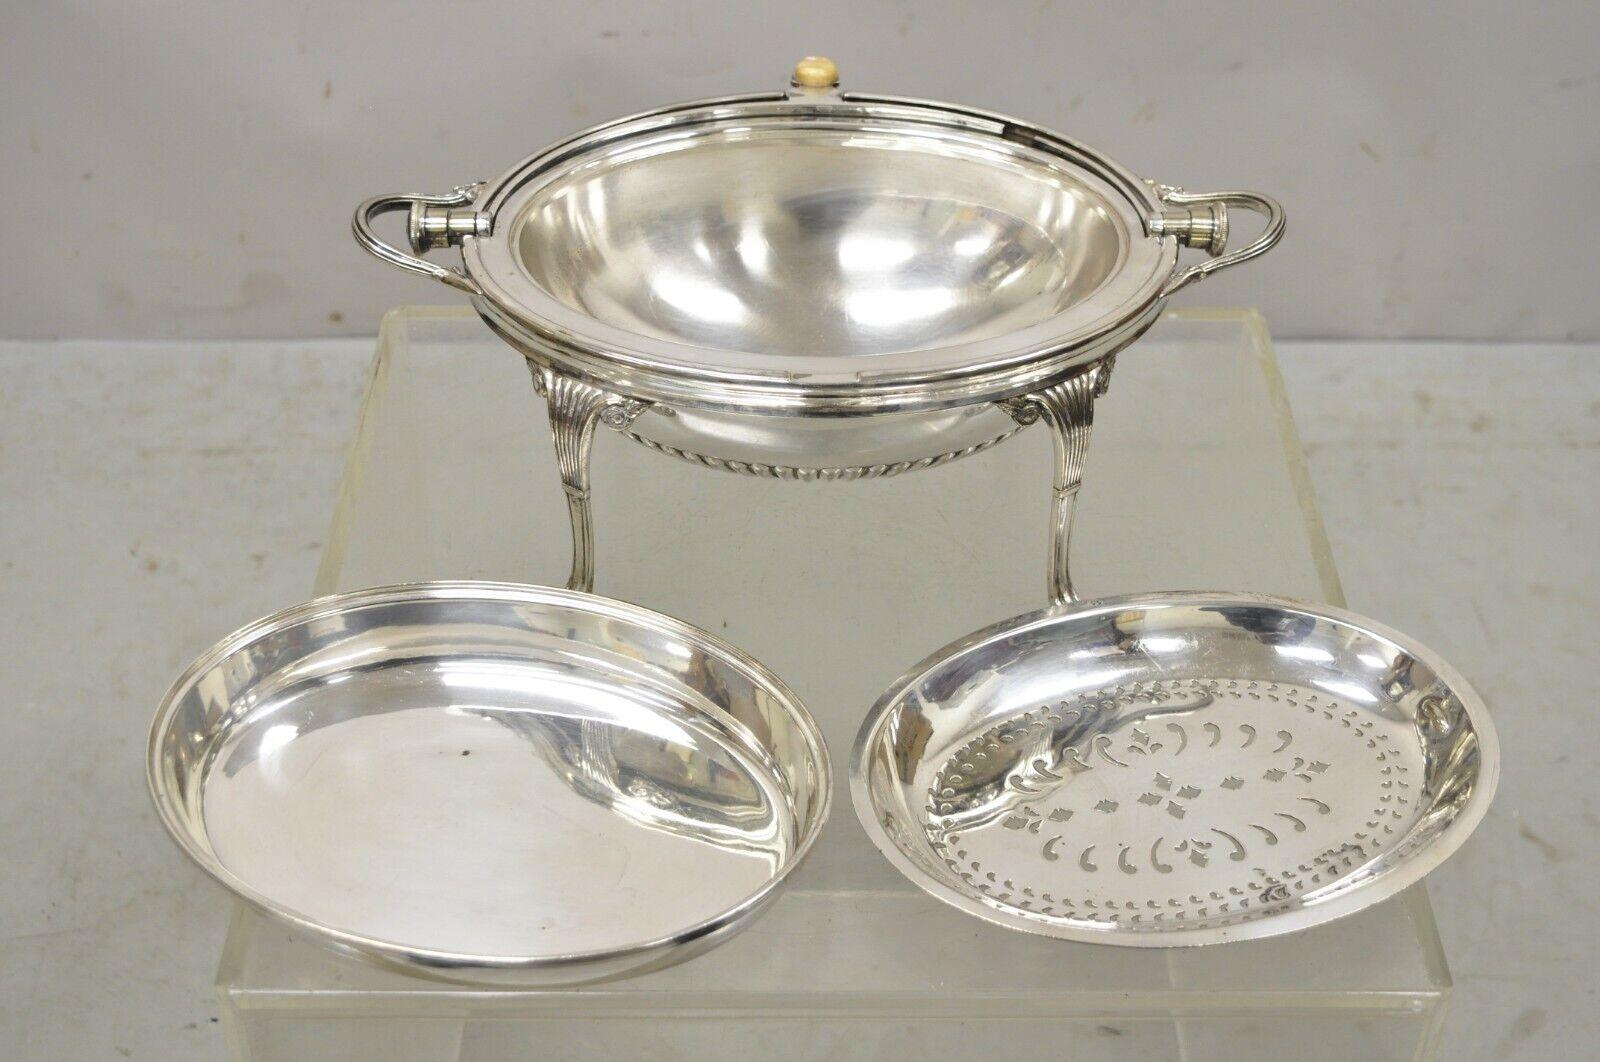 Antique English Sheffield Victorian Silver Plated Rotating Dome Serving Dish Warmer. Item features Revolving ribbed dome top, paw feet, twin handles. Circa Early 1900s. Measurements: 8.5